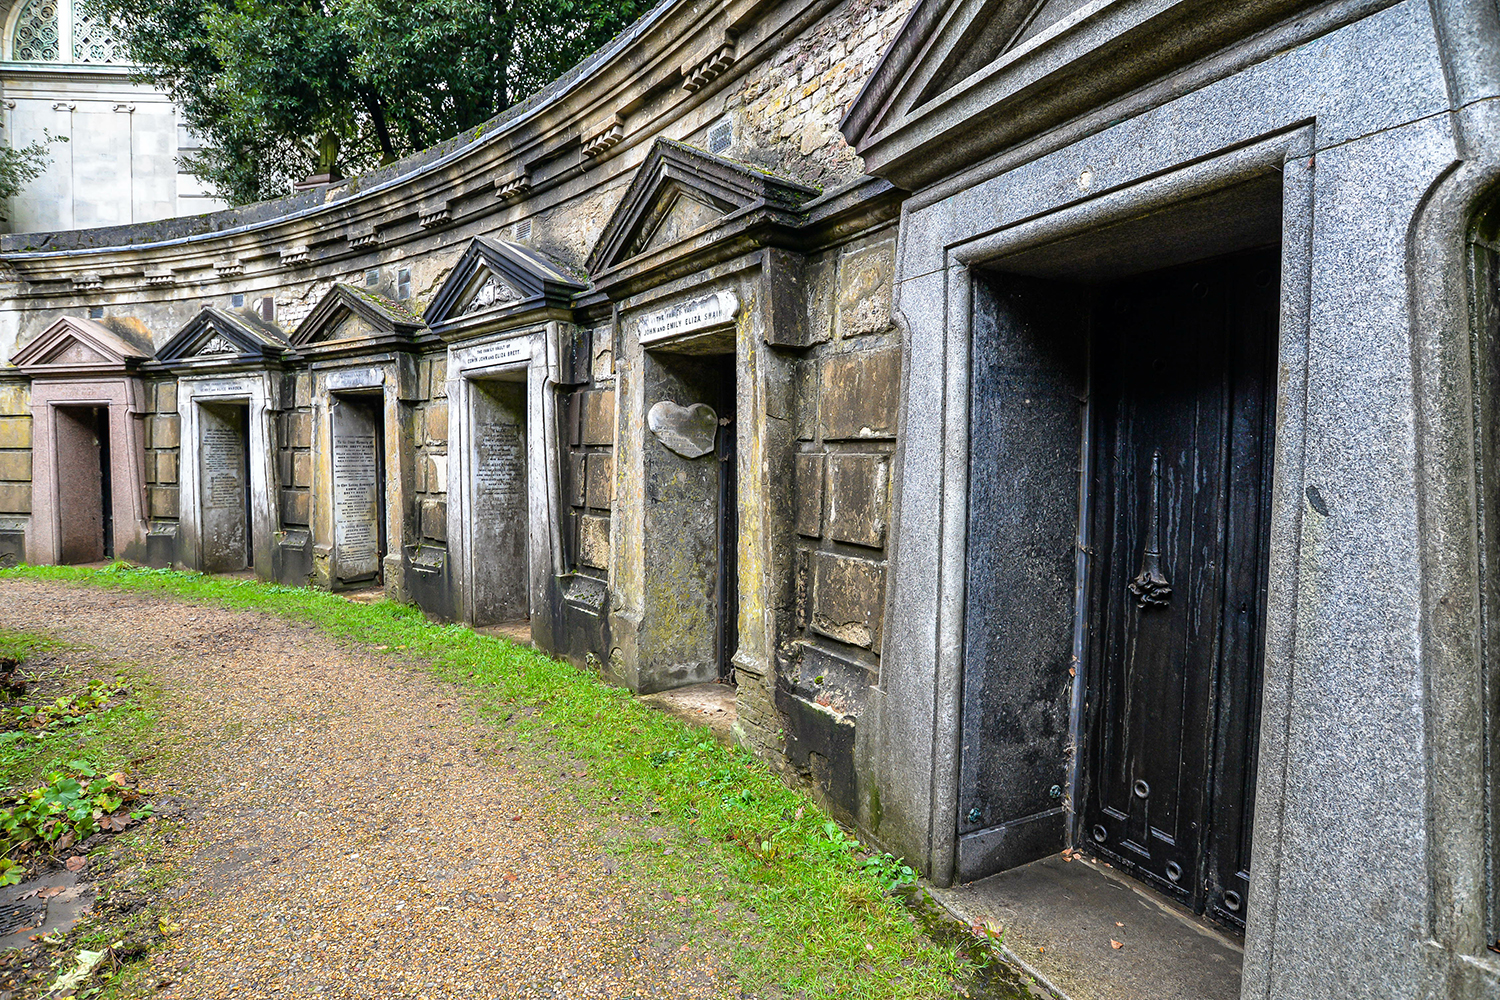 How Highgate Cemetery is Using BIM to Preserve its Site